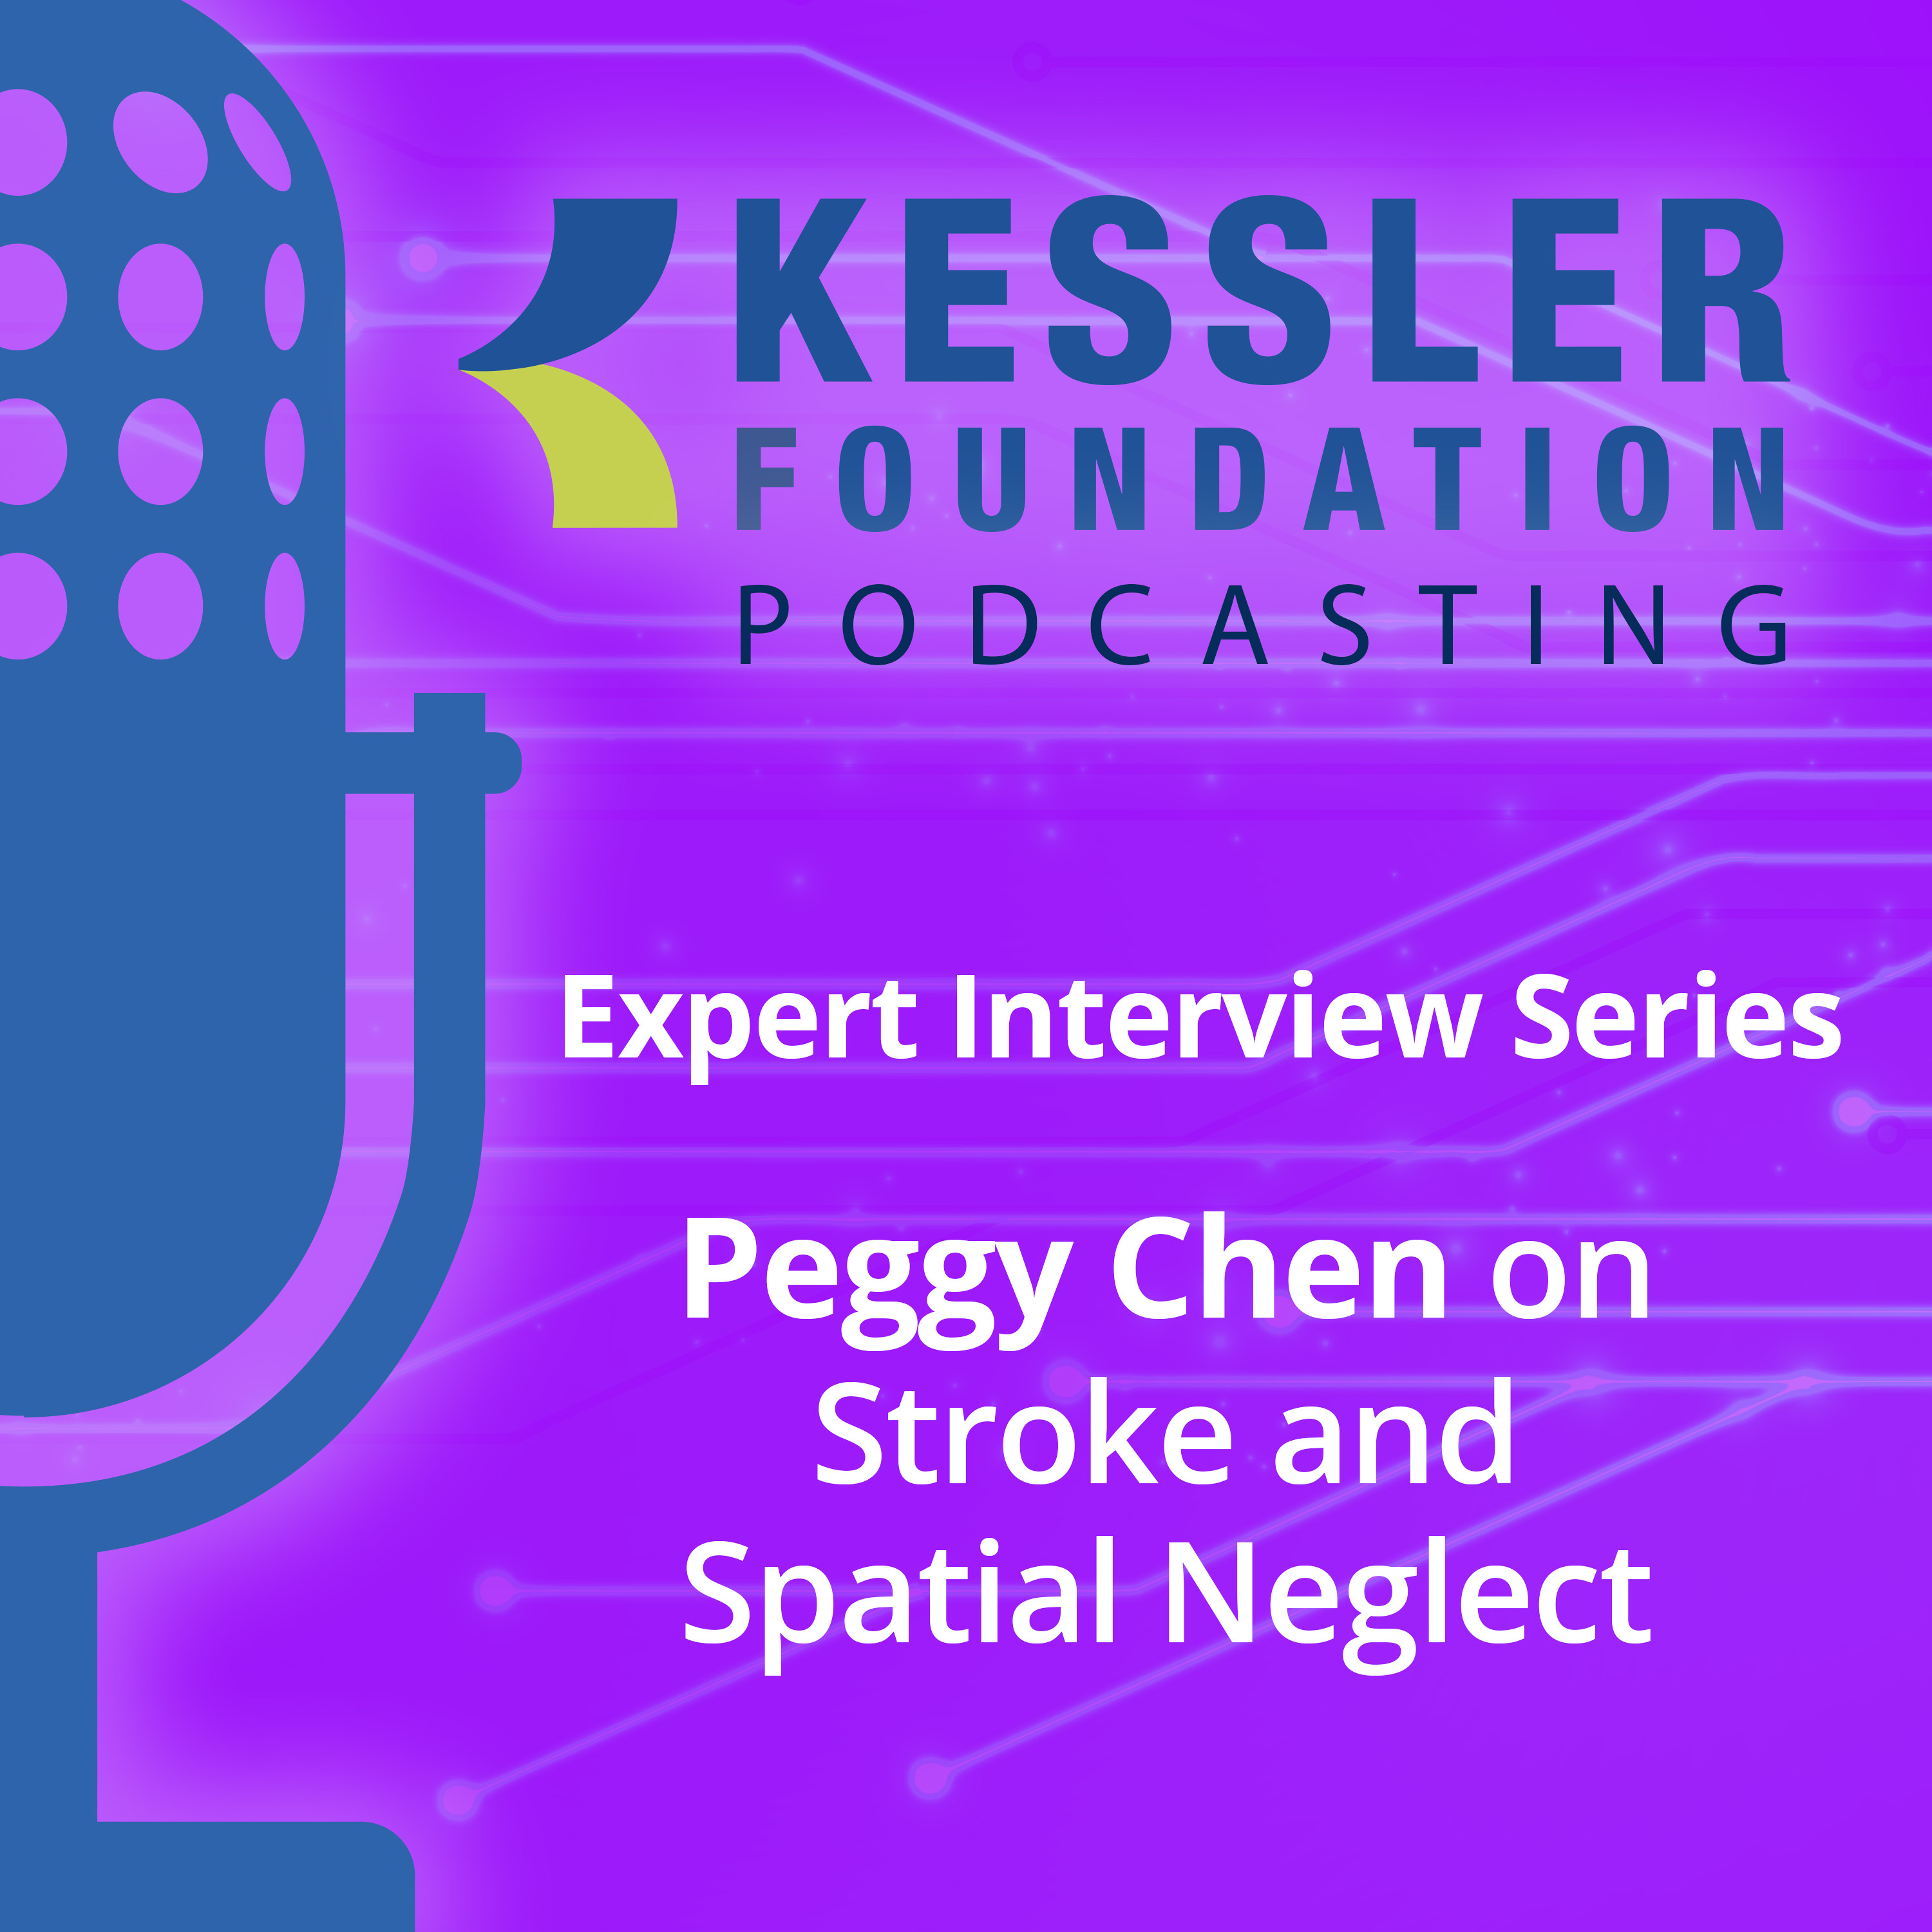 Peggy Chen on Stroke and Spatial Neglect - Expert Interview Series